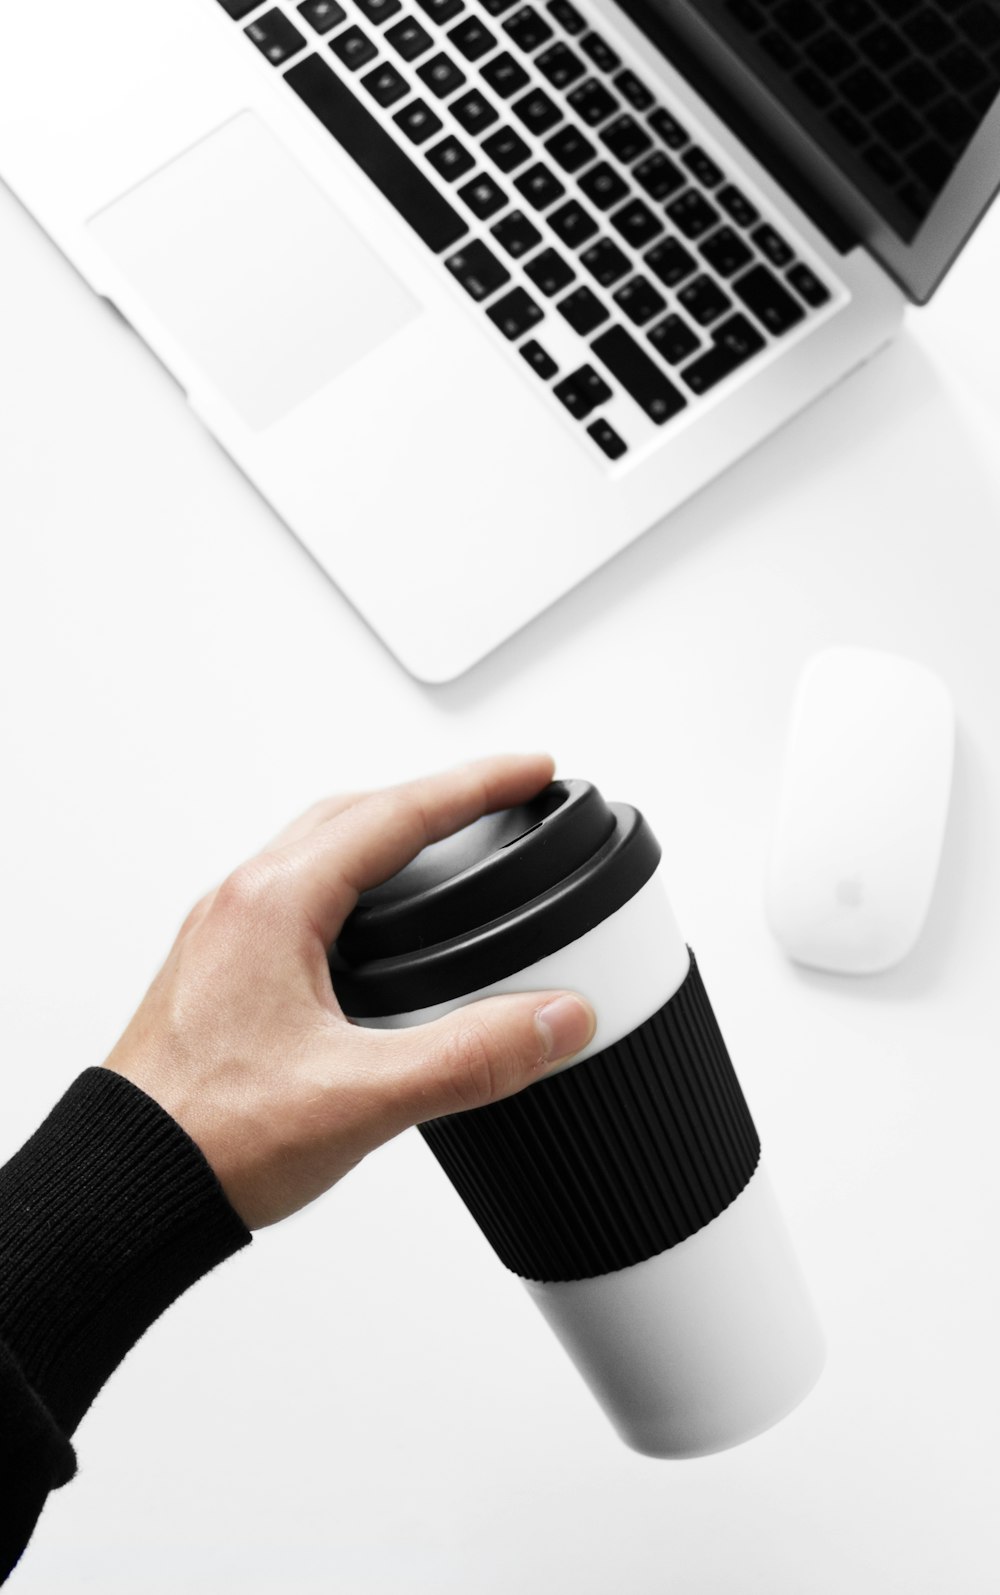 a person holding a coffee cup in front of a laptop